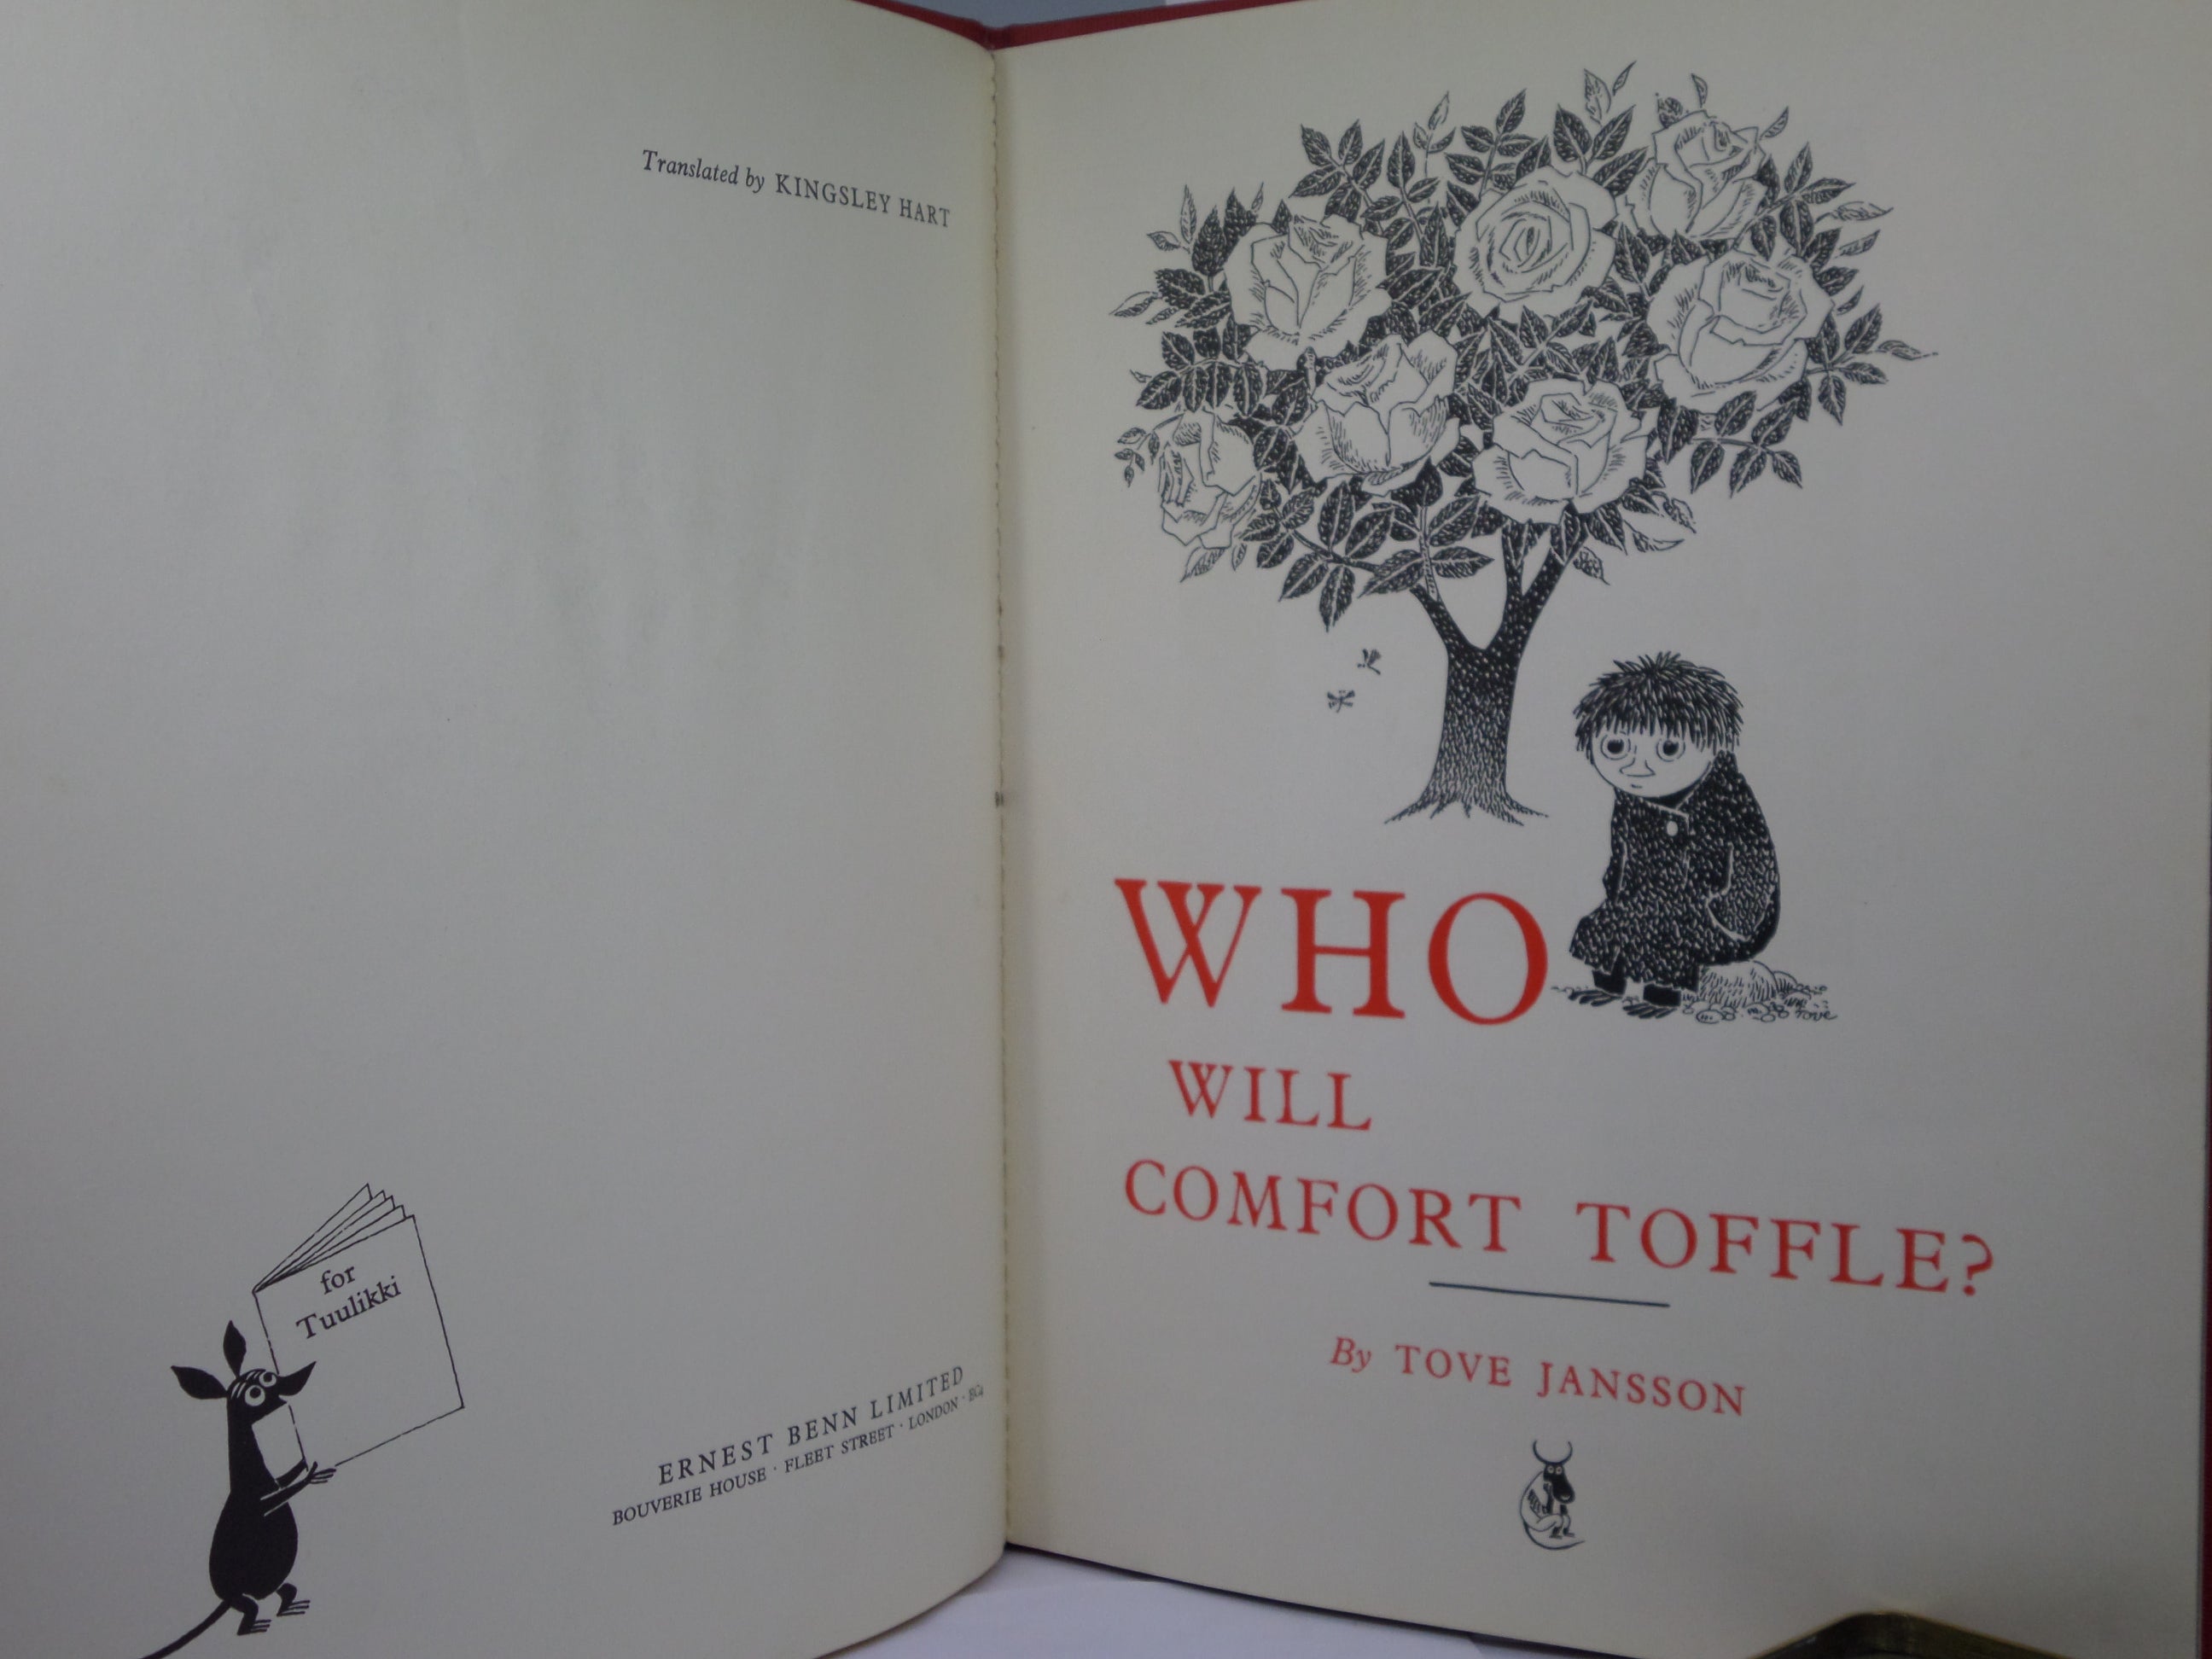 WHO WILL COMFORT TOFFLE? BY TOVE JANSSON 1960 FIRST ENGLISH EDITION HARDCOVER